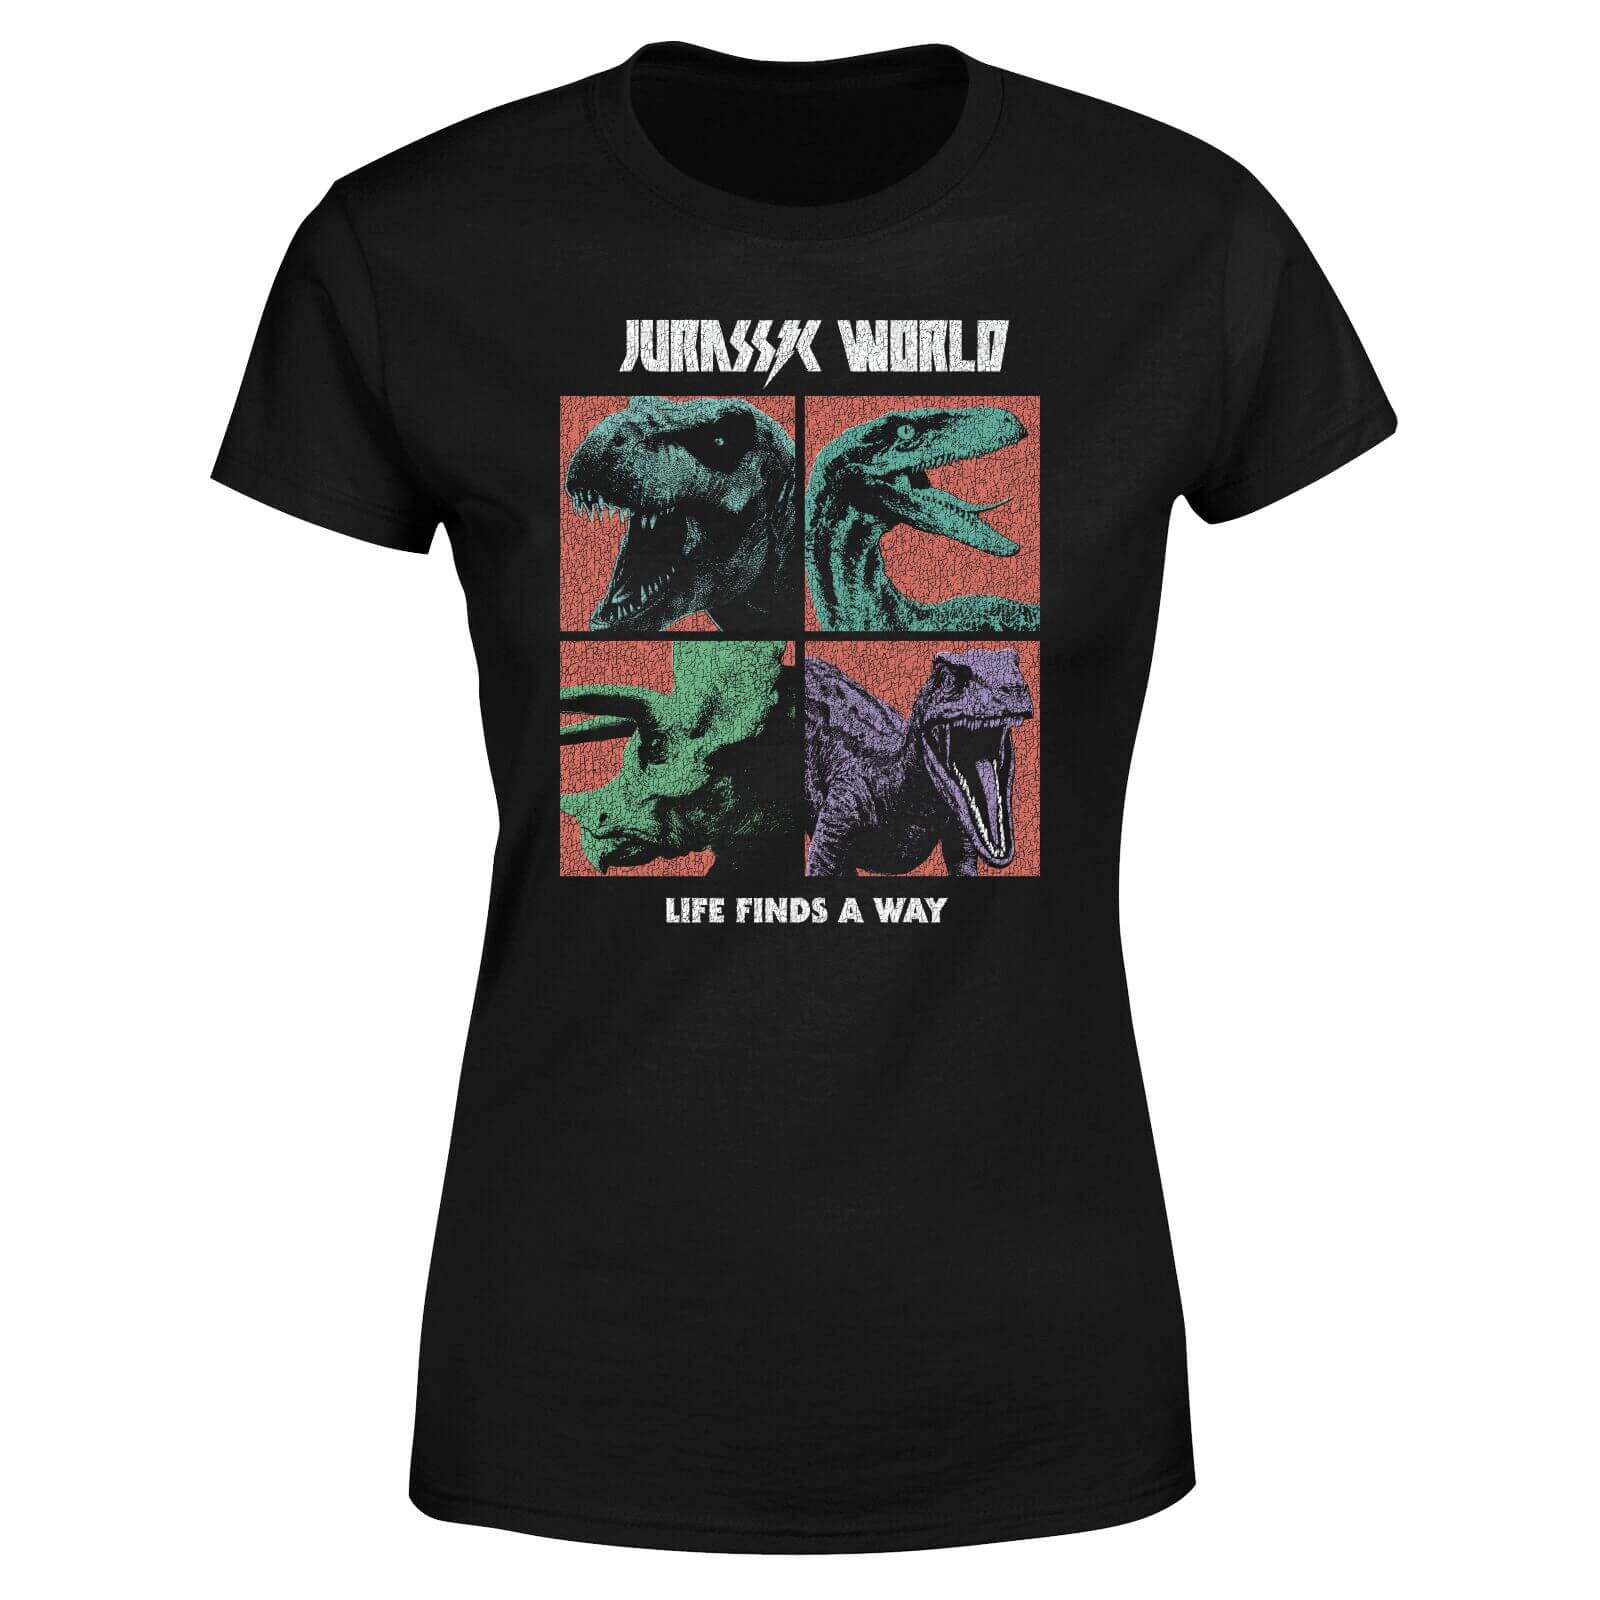 View the best prices for: jurassic park world four colour faces womens